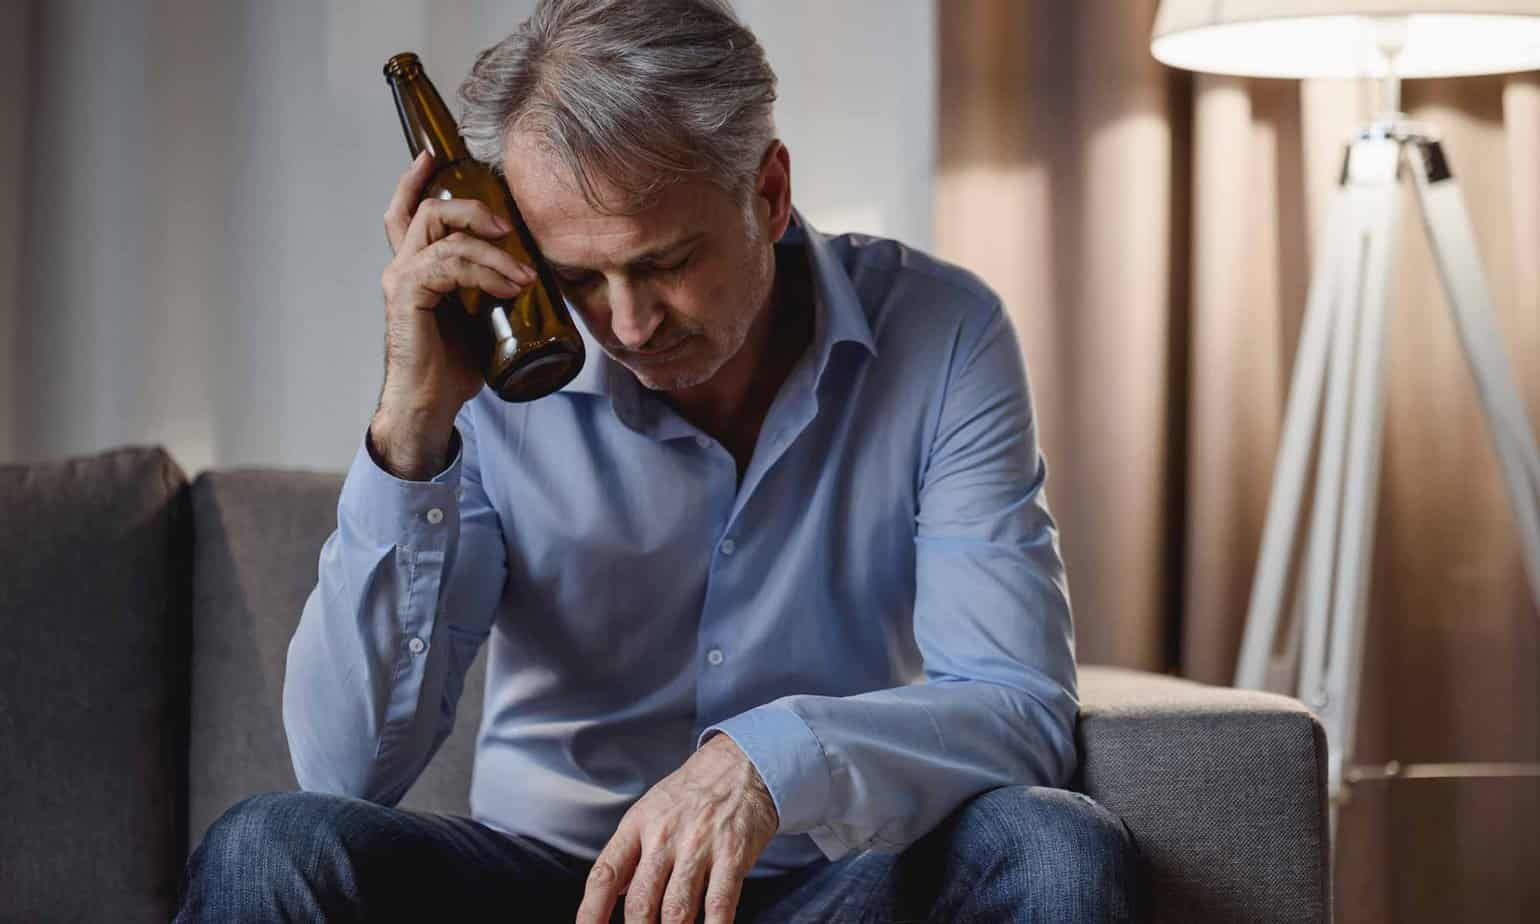 What to Do to Help When Your Father is an Alcoholic